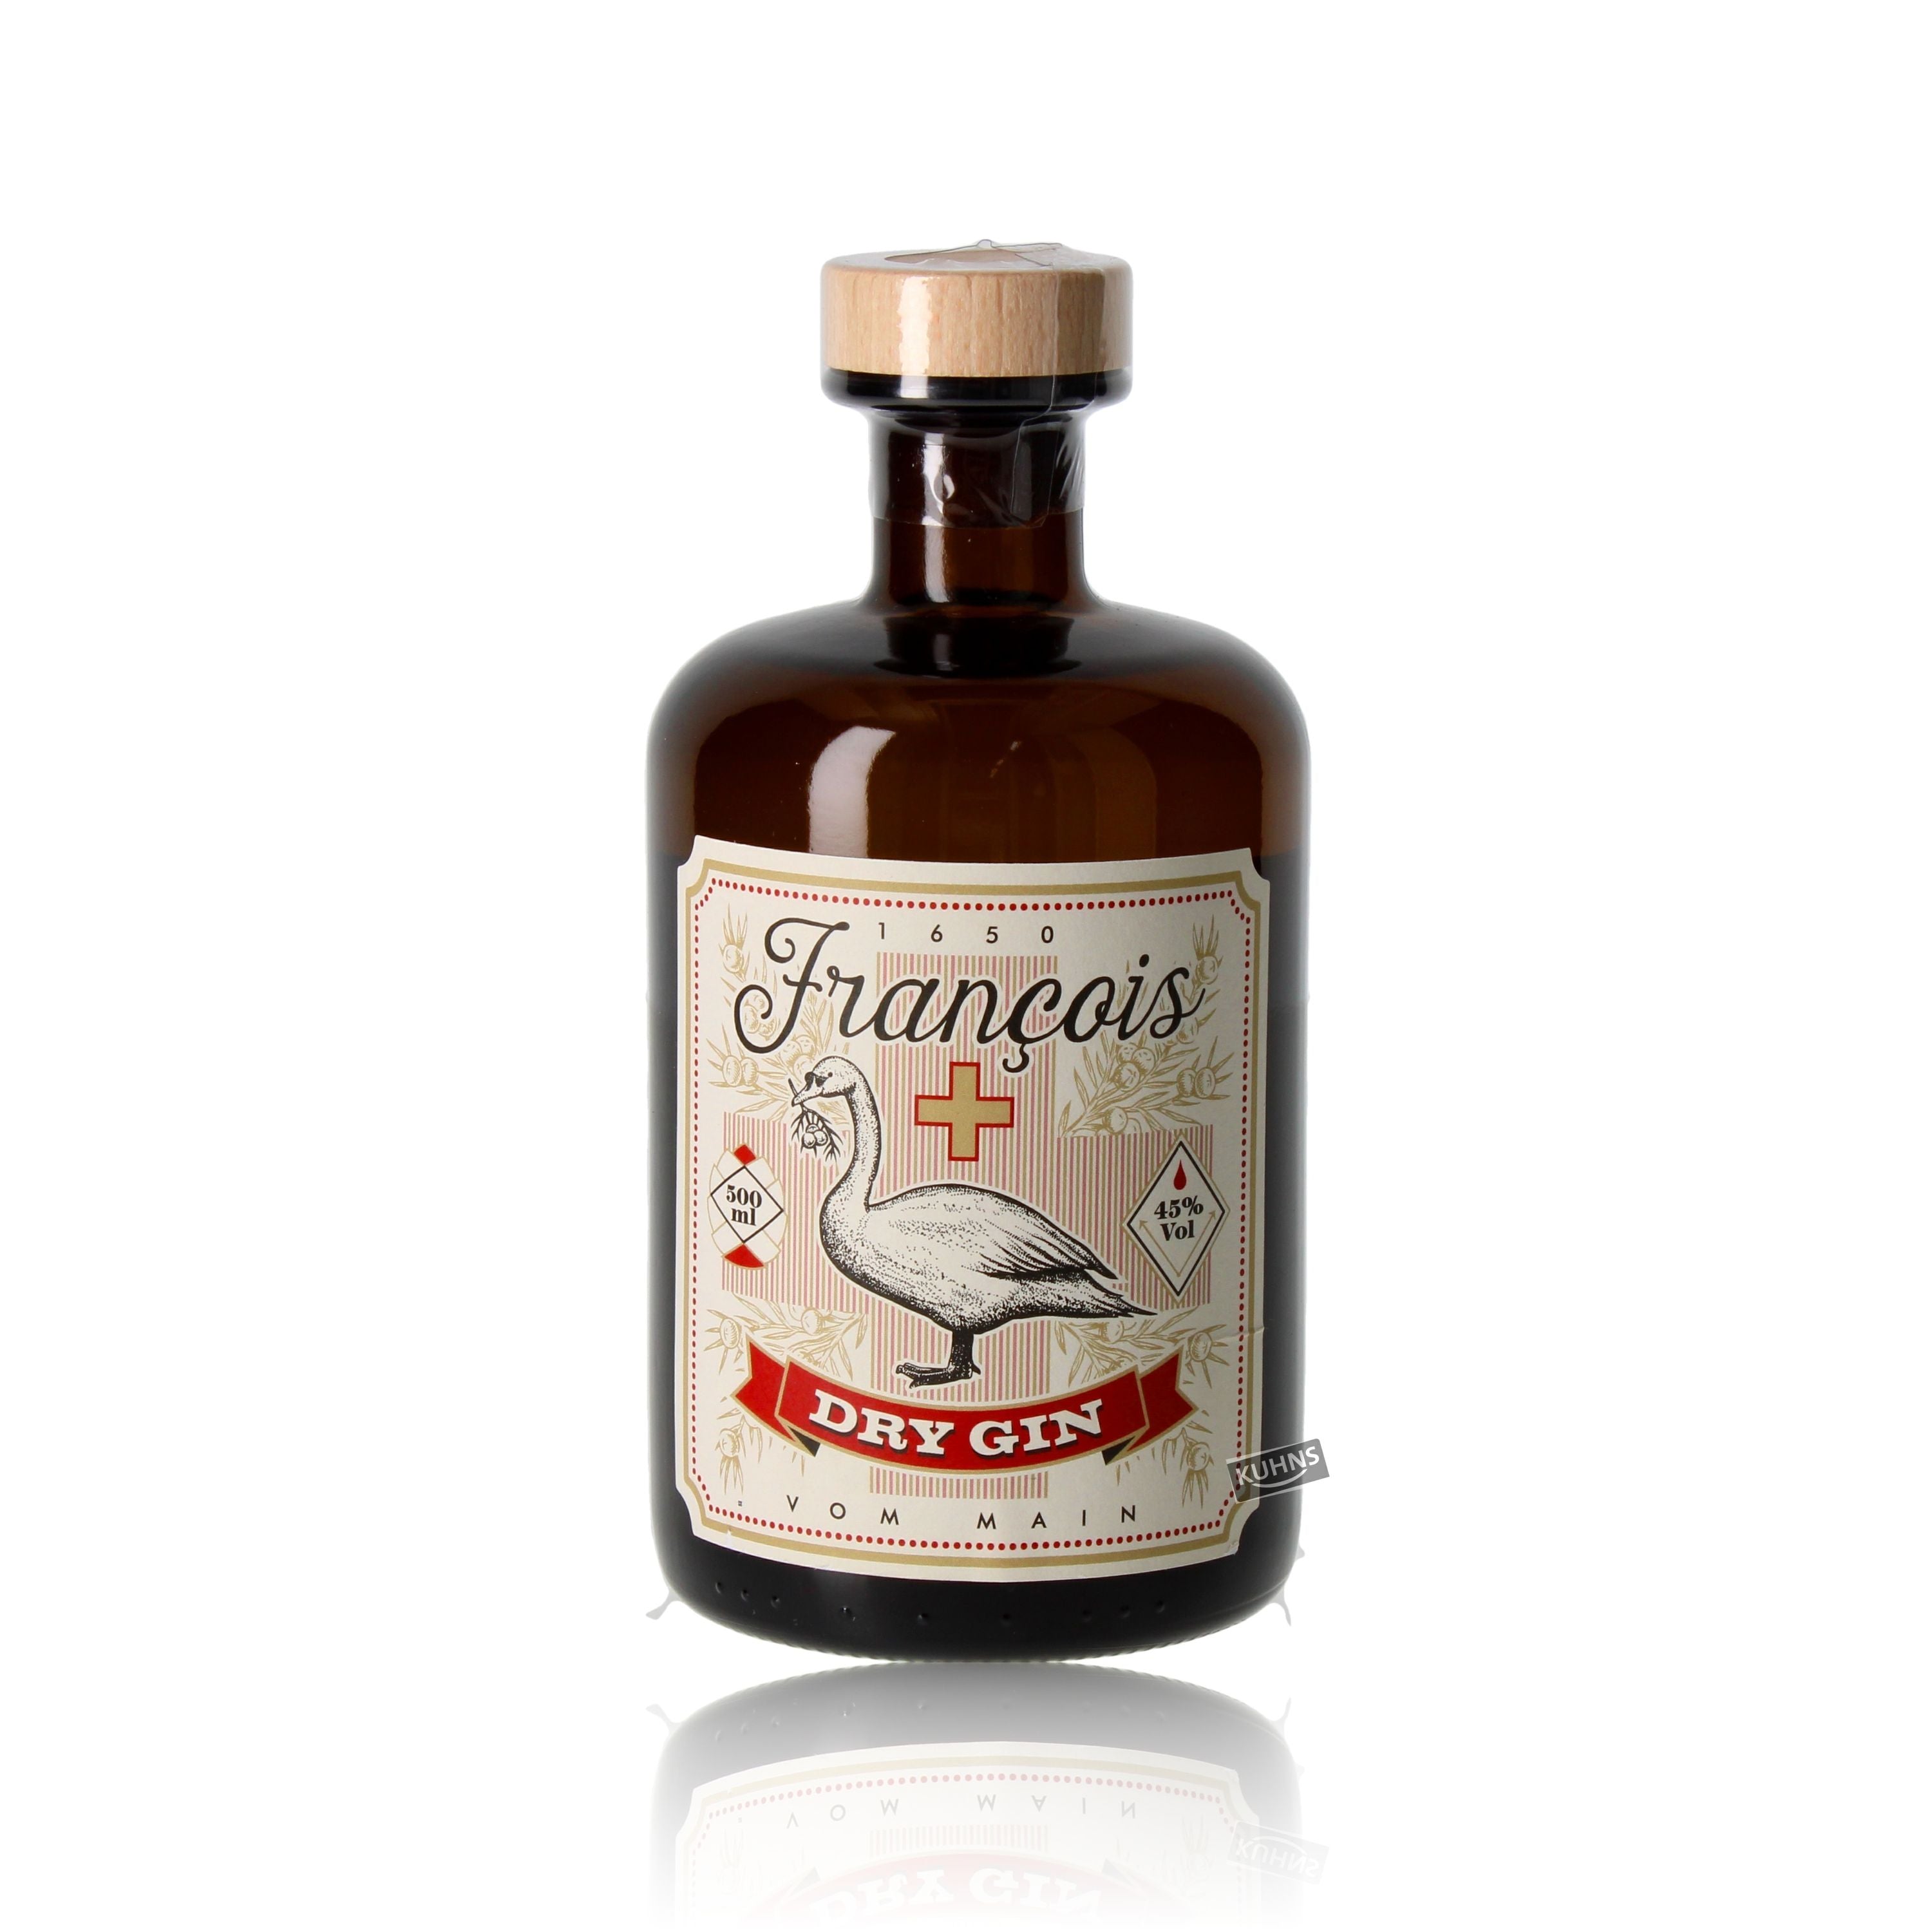 Francois Hanau Dry Gin 0.5l, alc. 45% by volume, gin from the Main